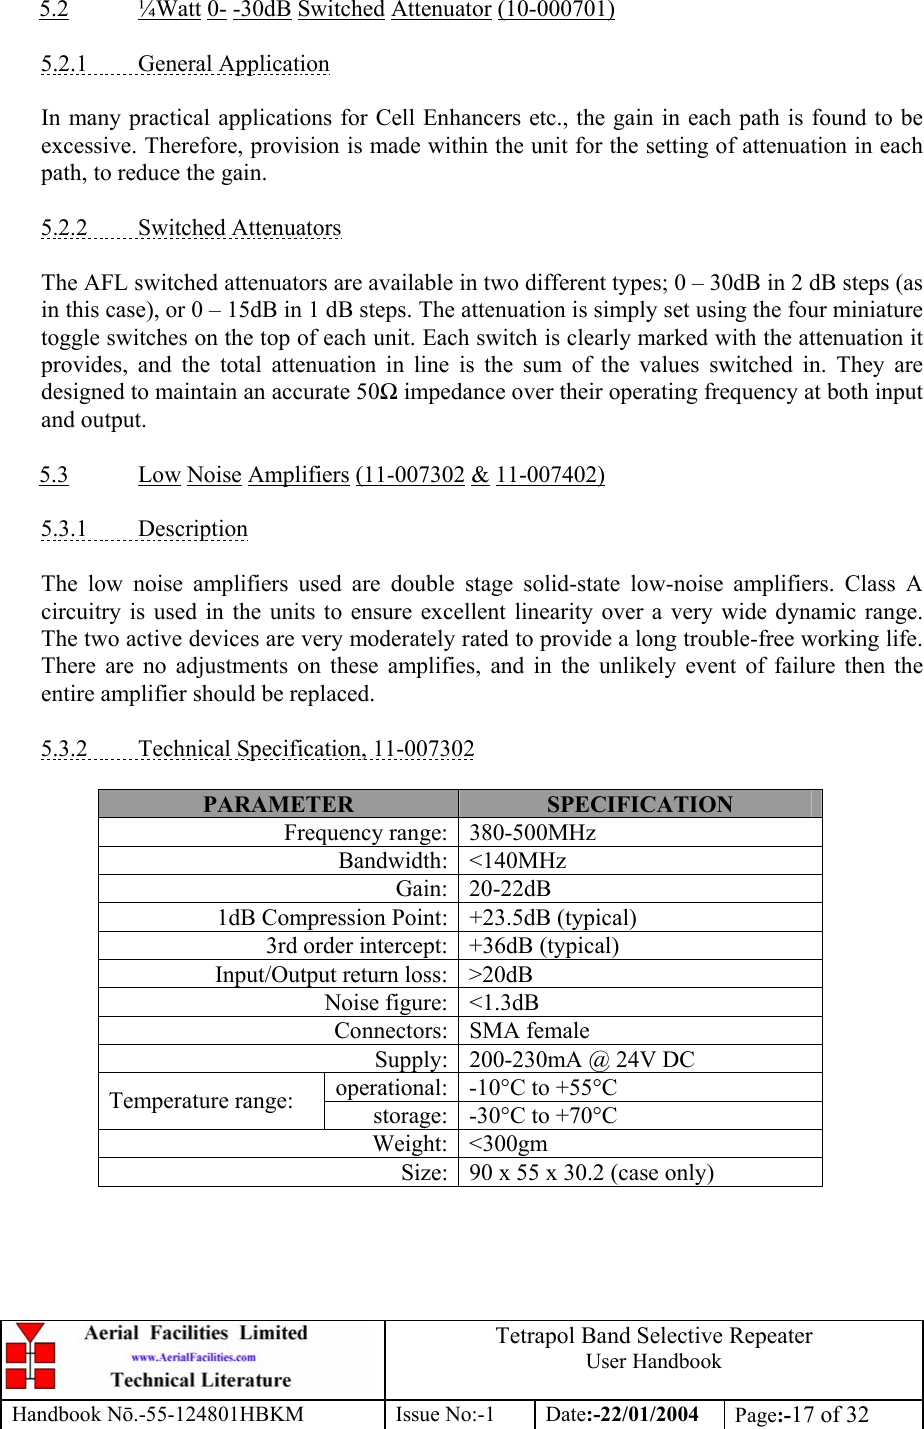  Tetrapol Band Selective Repeater User Handbook Handbook Nō.-55-124801HBKM Issue No:-1 Date:-22/01/2004  Page:-17 of 32  5.2 ¼Watt 0- -30dB Switched Attenuator (10-000701)  5.2.1 General Application  In many practical applications for Cell Enhancers etc., the gain in each path is found to be excessive. Therefore, provision is made within the unit for the setting of attenuation in each path, to reduce the gain.  5.2.2 Switched Attenuators  The AFL switched attenuators are available in two different types; 0 – 30dB in 2 dB steps (as in this case), or 0 – 15dB in 1 dB steps. The attenuation is simply set using the four miniature toggle switches on the top of each unit. Each switch is clearly marked with the attenuation it provides, and the total attenuation in line is the sum of the values switched in. They are designed to maintain an accurate 50Ω impedance over their operating frequency at both input and output.  5.3 Low Noise Amplifiers (11-007302 &amp; 11-007402)  5.3.1 Description  The low noise amplifiers used are double stage solid-state low-noise amplifiers. Class A circuitry is used in the units to ensure excellent linearity over a very wide dynamic range. The two active devices are very moderately rated to provide a long trouble-free working life. There are no adjustments on these amplifies, and in the unlikely event of failure then the entire amplifier should be replaced.  5.3.2  Technical Specification, 11-007302  PARAMETER  SPECIFICATION Frequency range: 380-500MHz Bandwidth: &lt;140MHz Gain: 20-22dB 1dB Compression Point: +23.5dB (typical) 3rd order intercept: +36dB (typical) Input/Output return loss: &gt;20dB Noise figure: &lt;1.3dB Connectors: SMA female Supply: 200-230mA @ 24V DC operational: -10°C to +55°C Temperature range:  storage: -30°C to +70°C Weight: &lt;300gm Size: 90 x 55 x 30.2 (case only)  